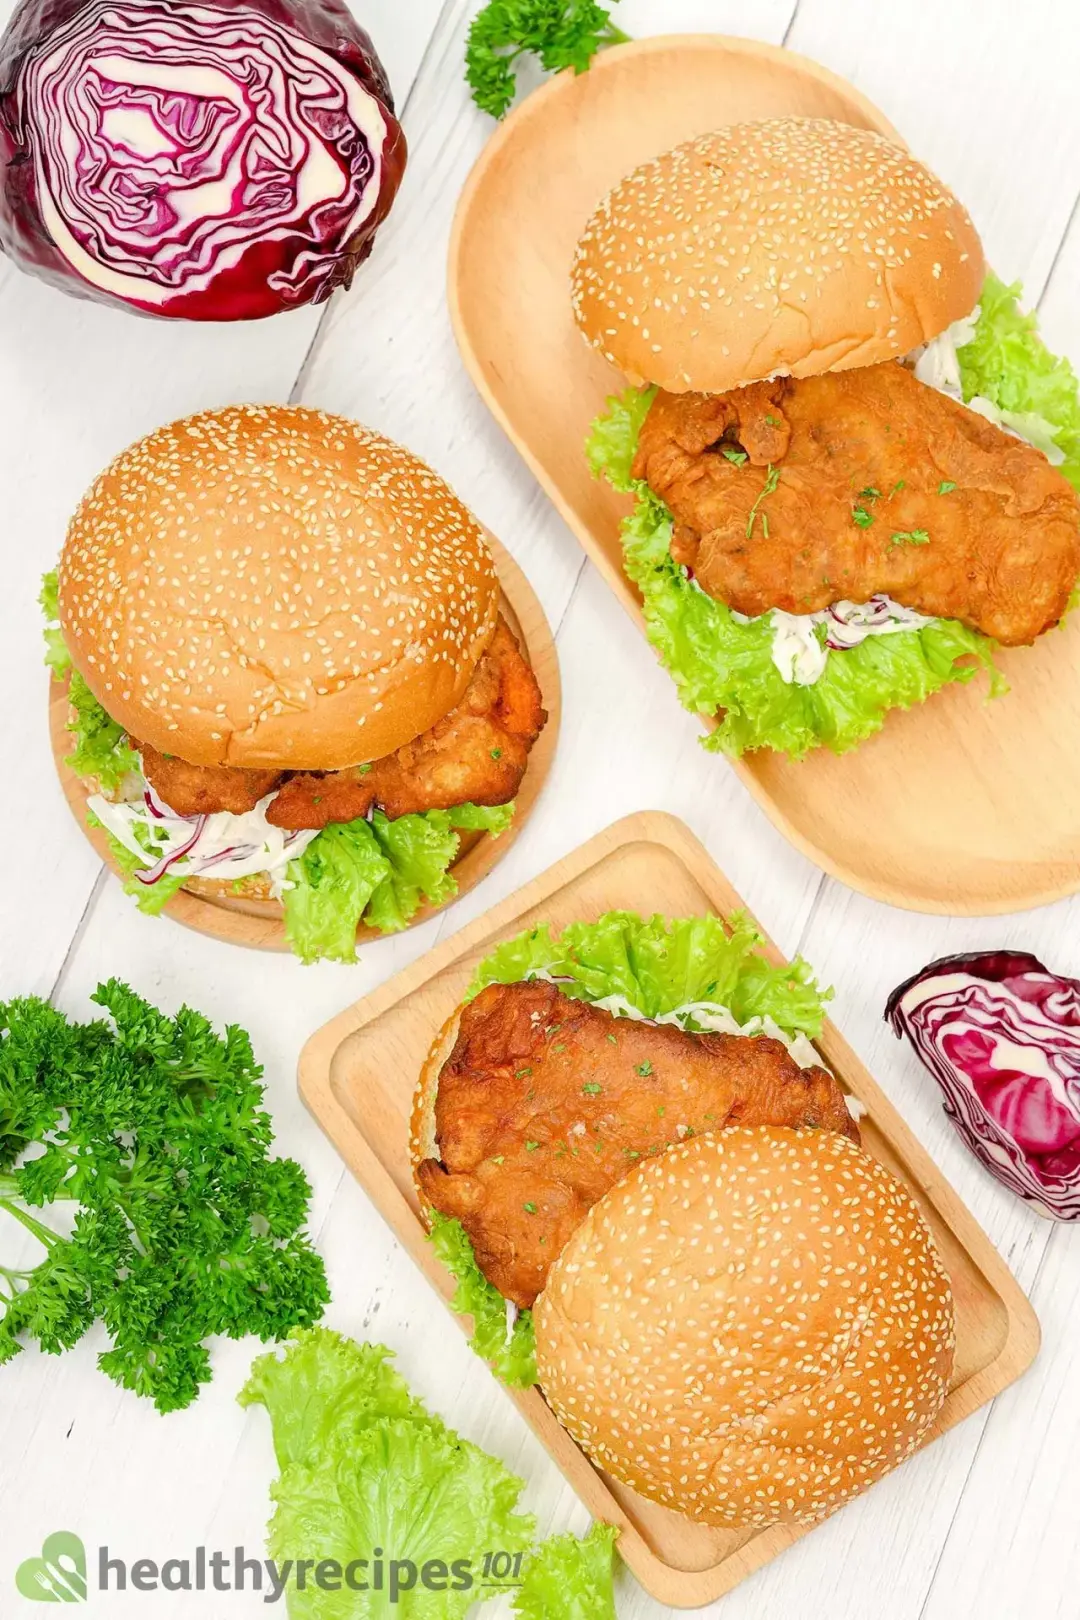 What to Serve With Chicken Burger